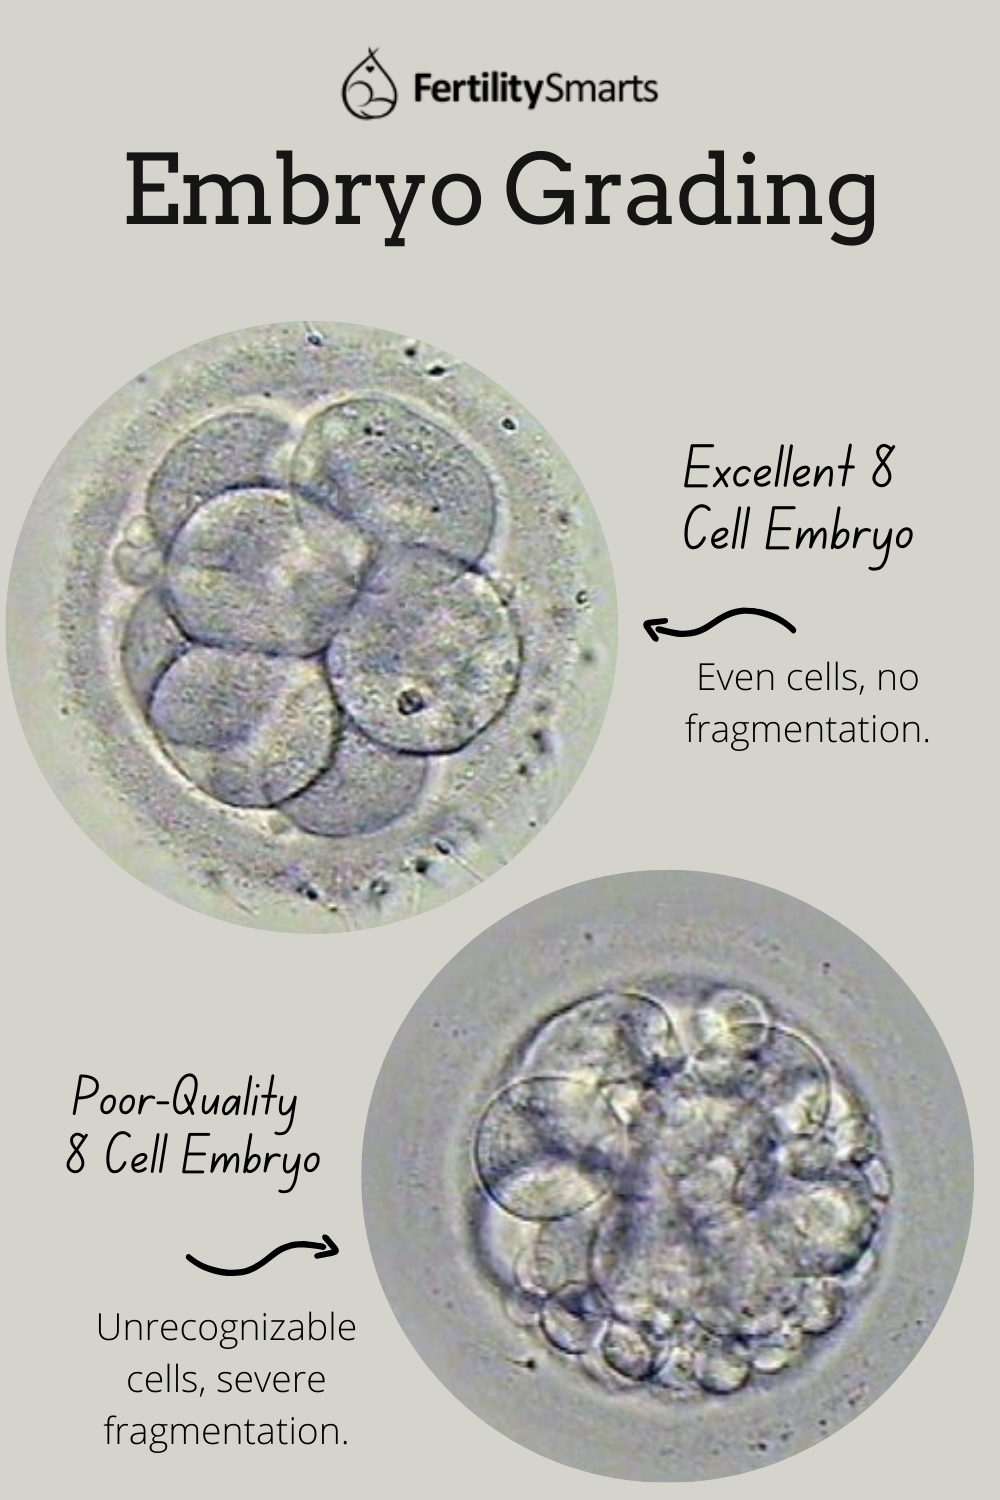 Photos of poor and quality 8 cell embryos. 